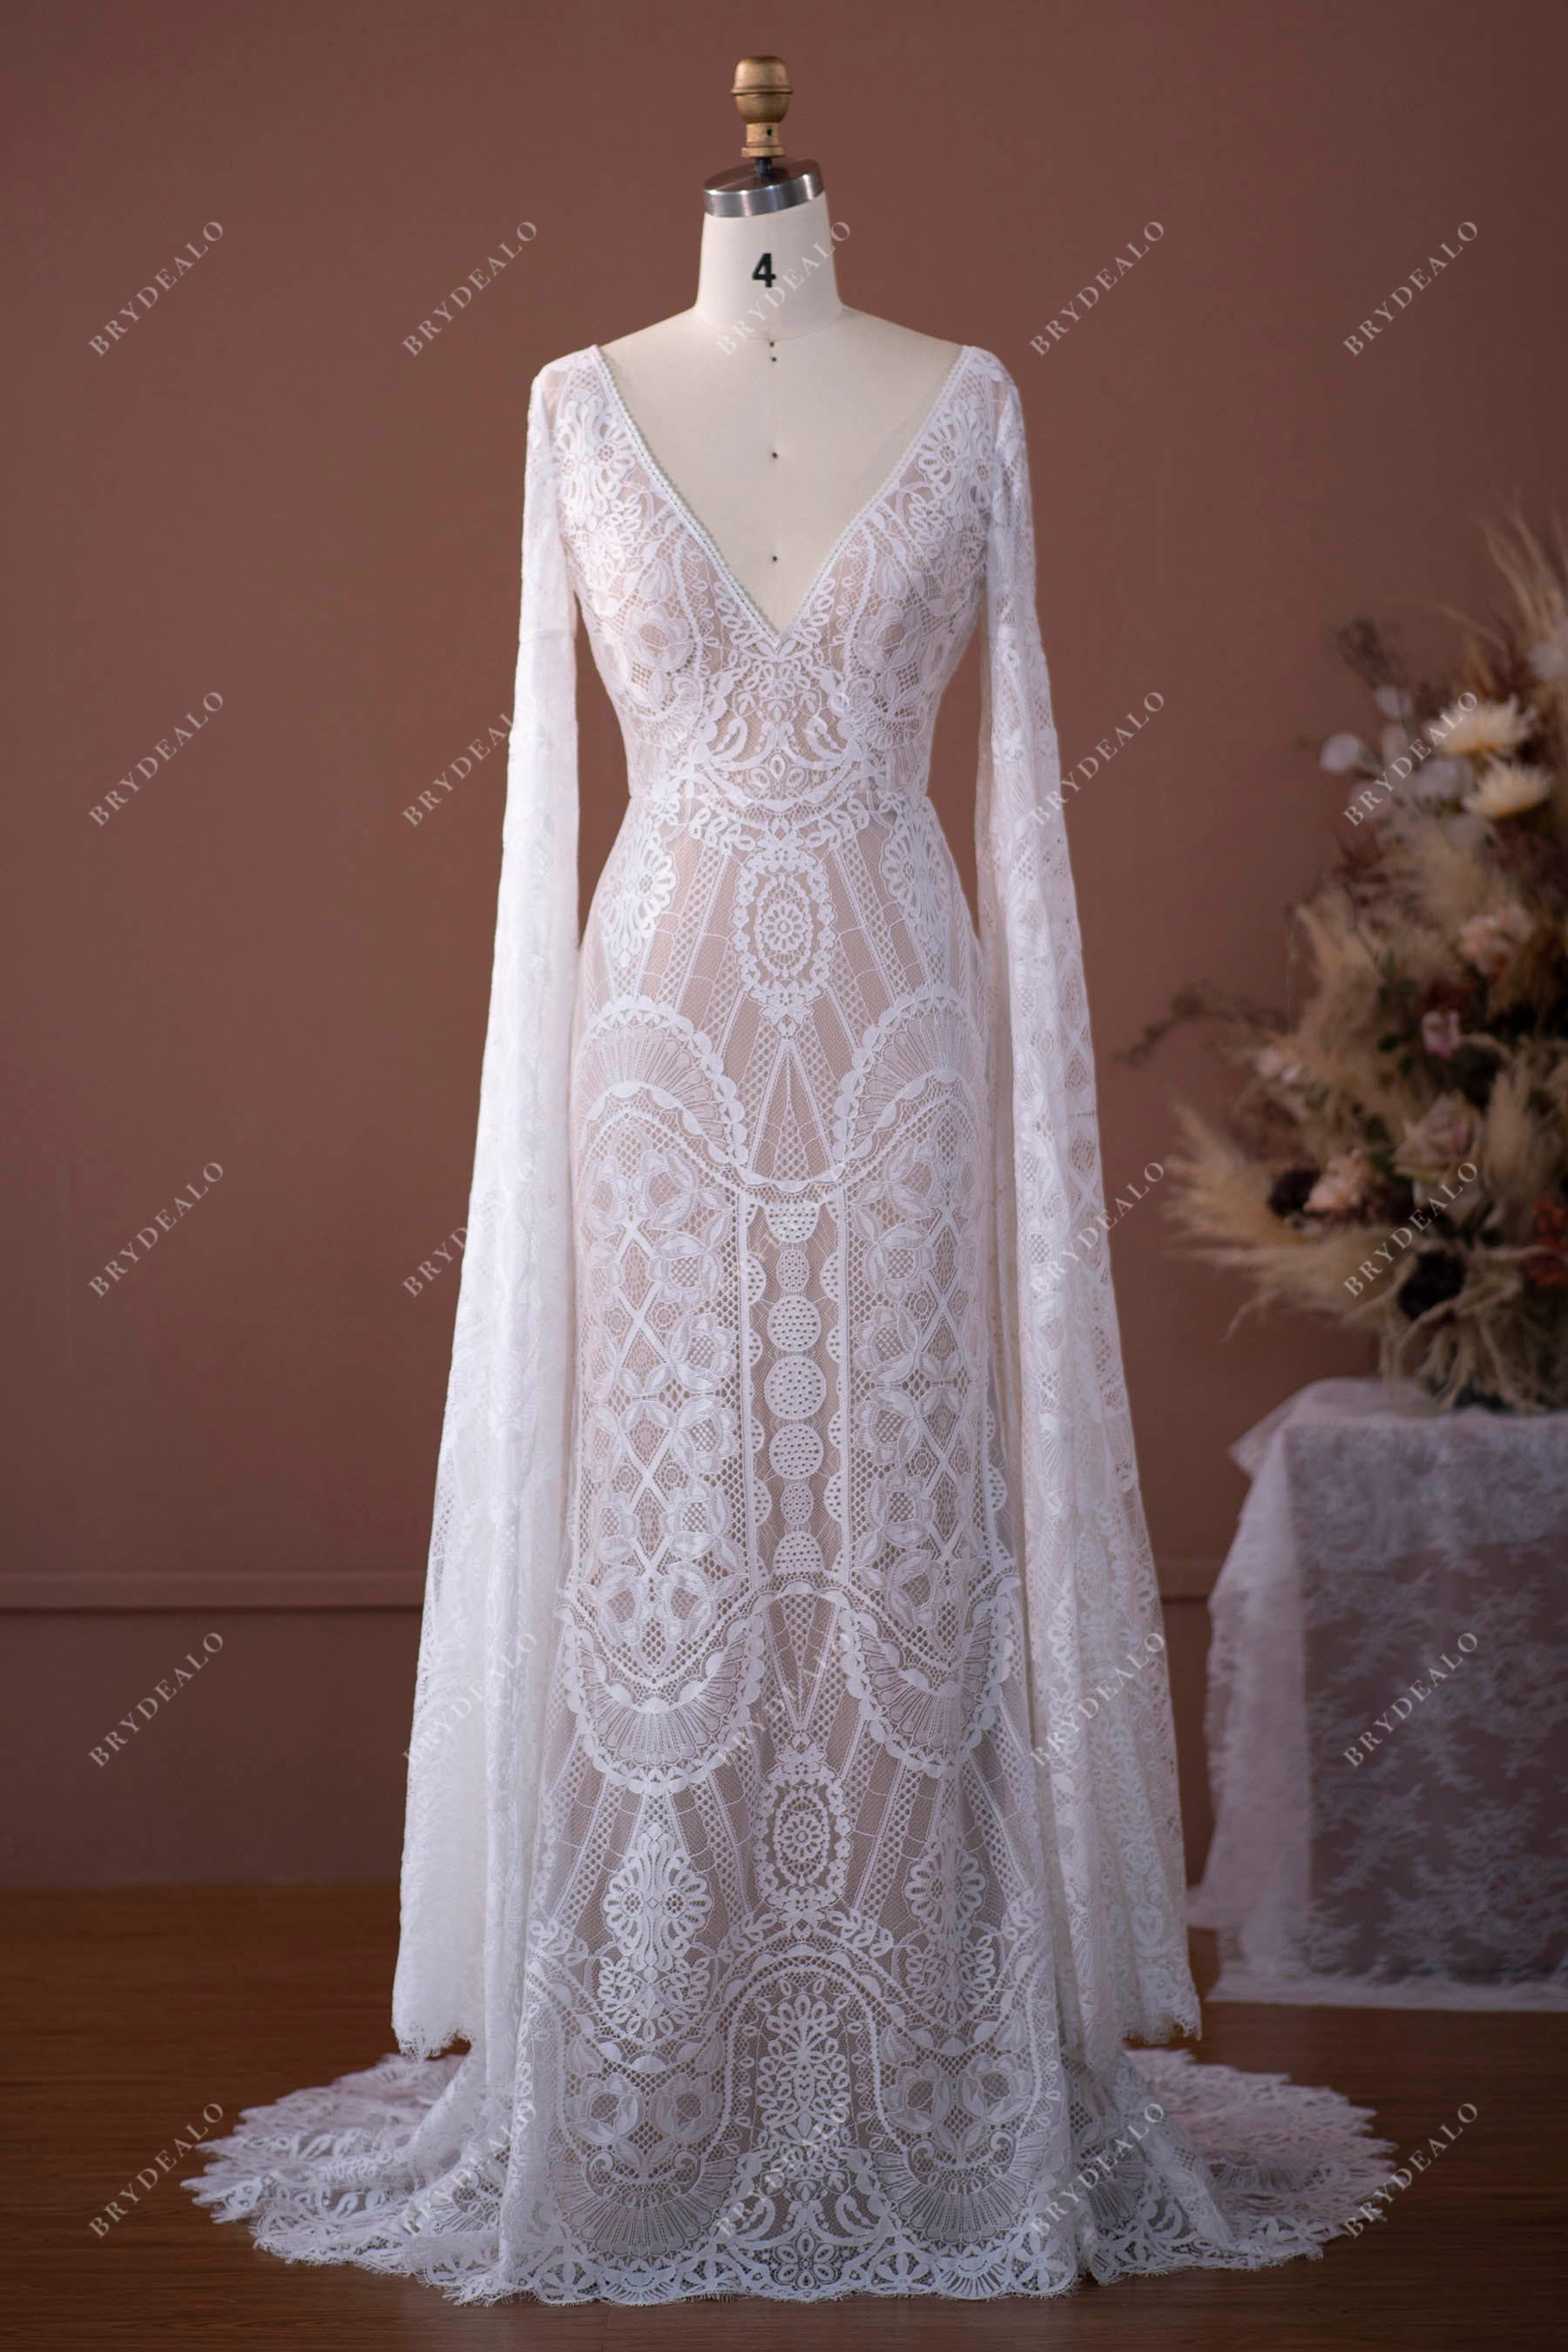 Super Long Sleeve Boho Lace V-neck Fit and Flare Wedding Gown